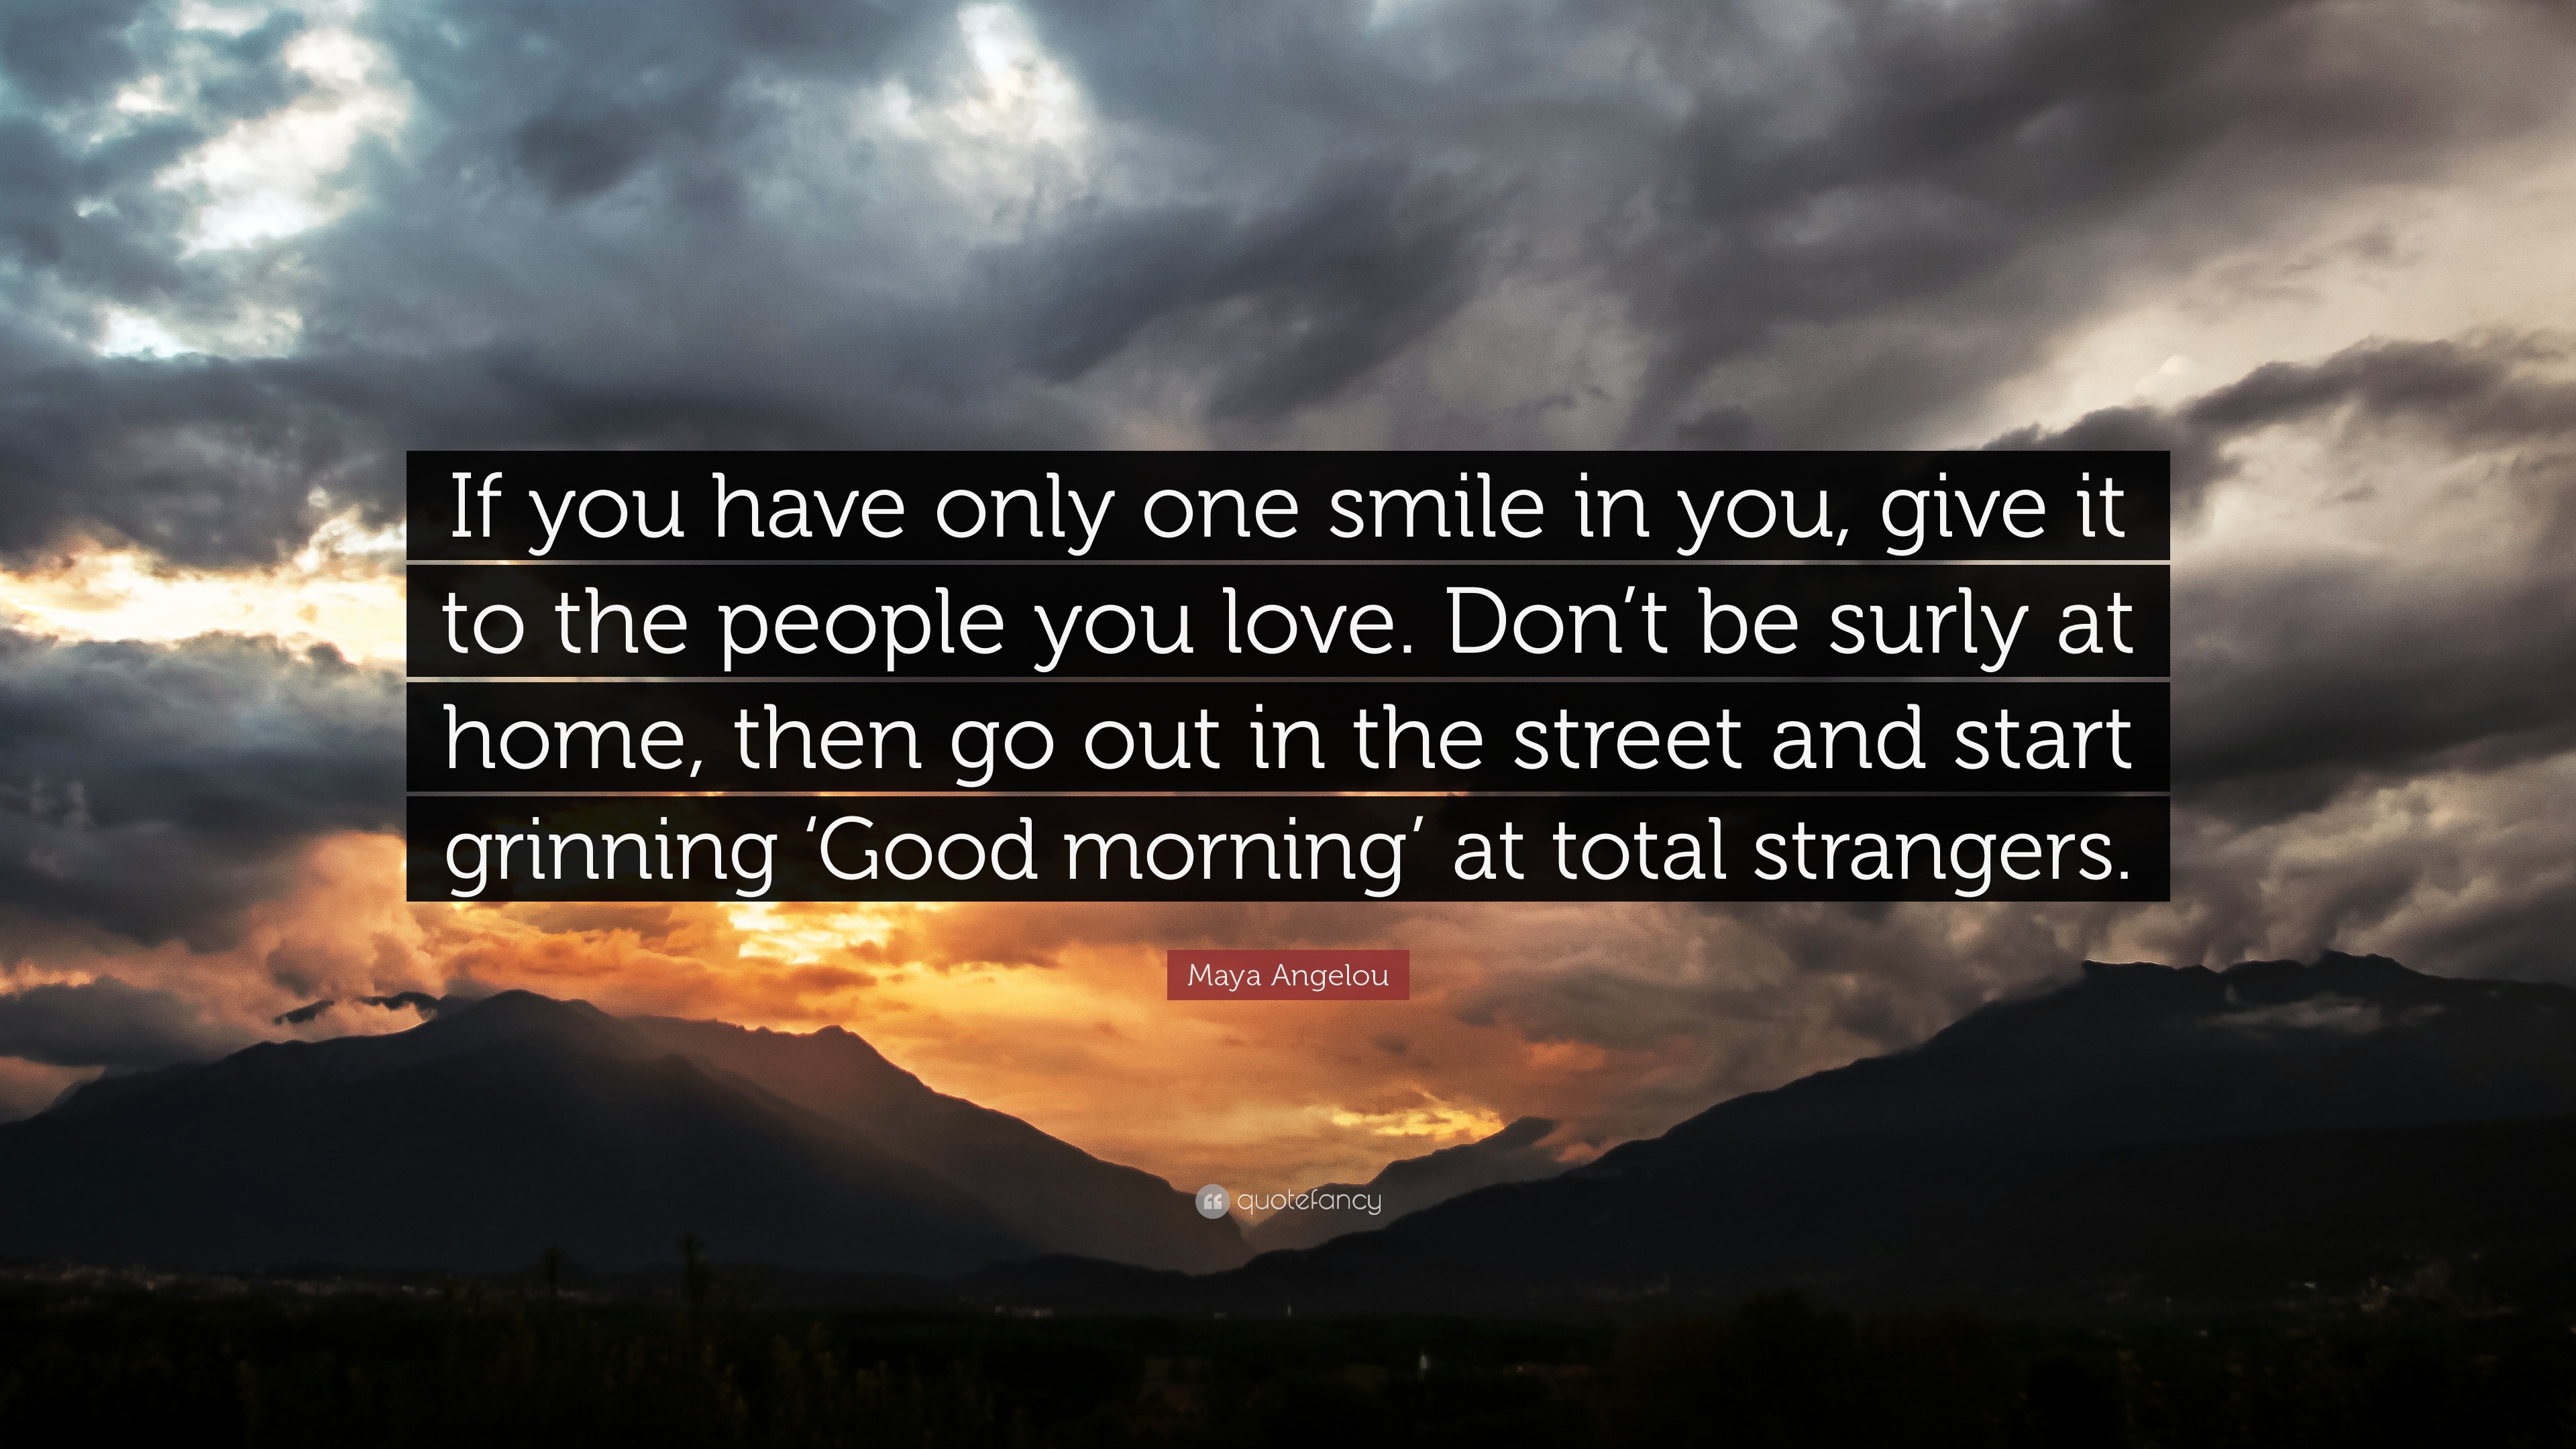 Maya Angelou Quote “If you have only one smile in you give it